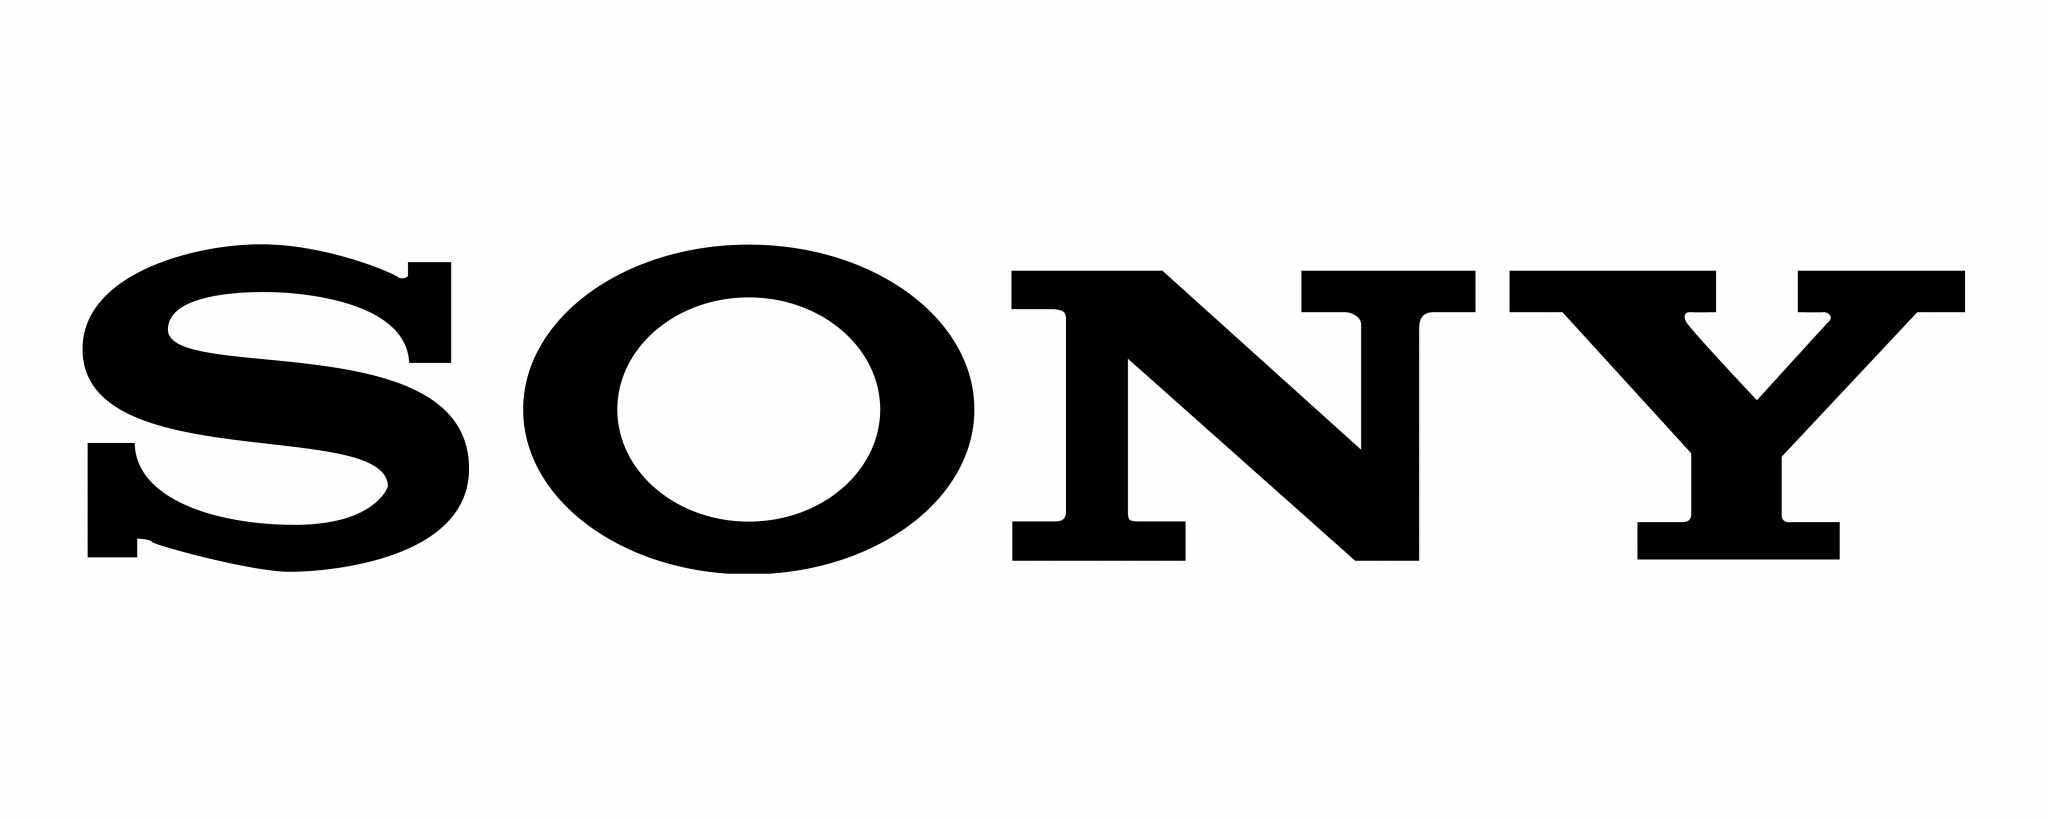 Sony TV Logo - Sony is Considering Selling Xperia Mobile and Bravia TV Businesses